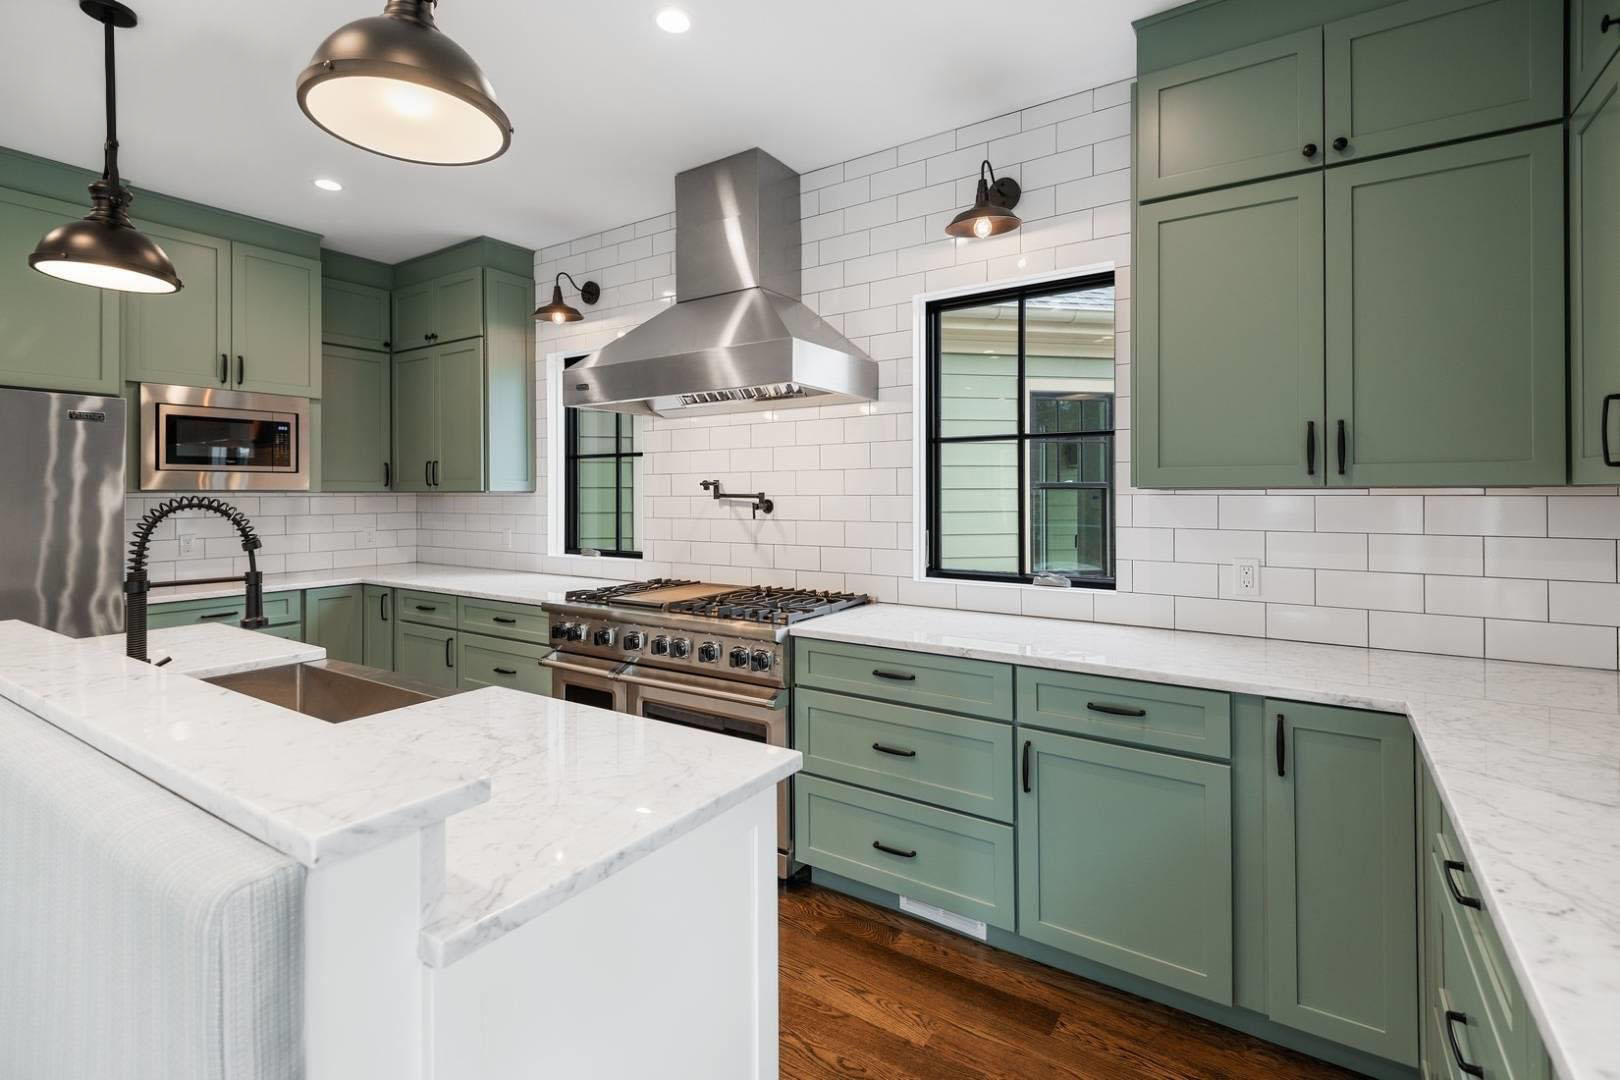 Two tone kitchen cabinets featuring green uppers and lowers with a white island.Black hardware, marble counters and a white subway tile backsplash.